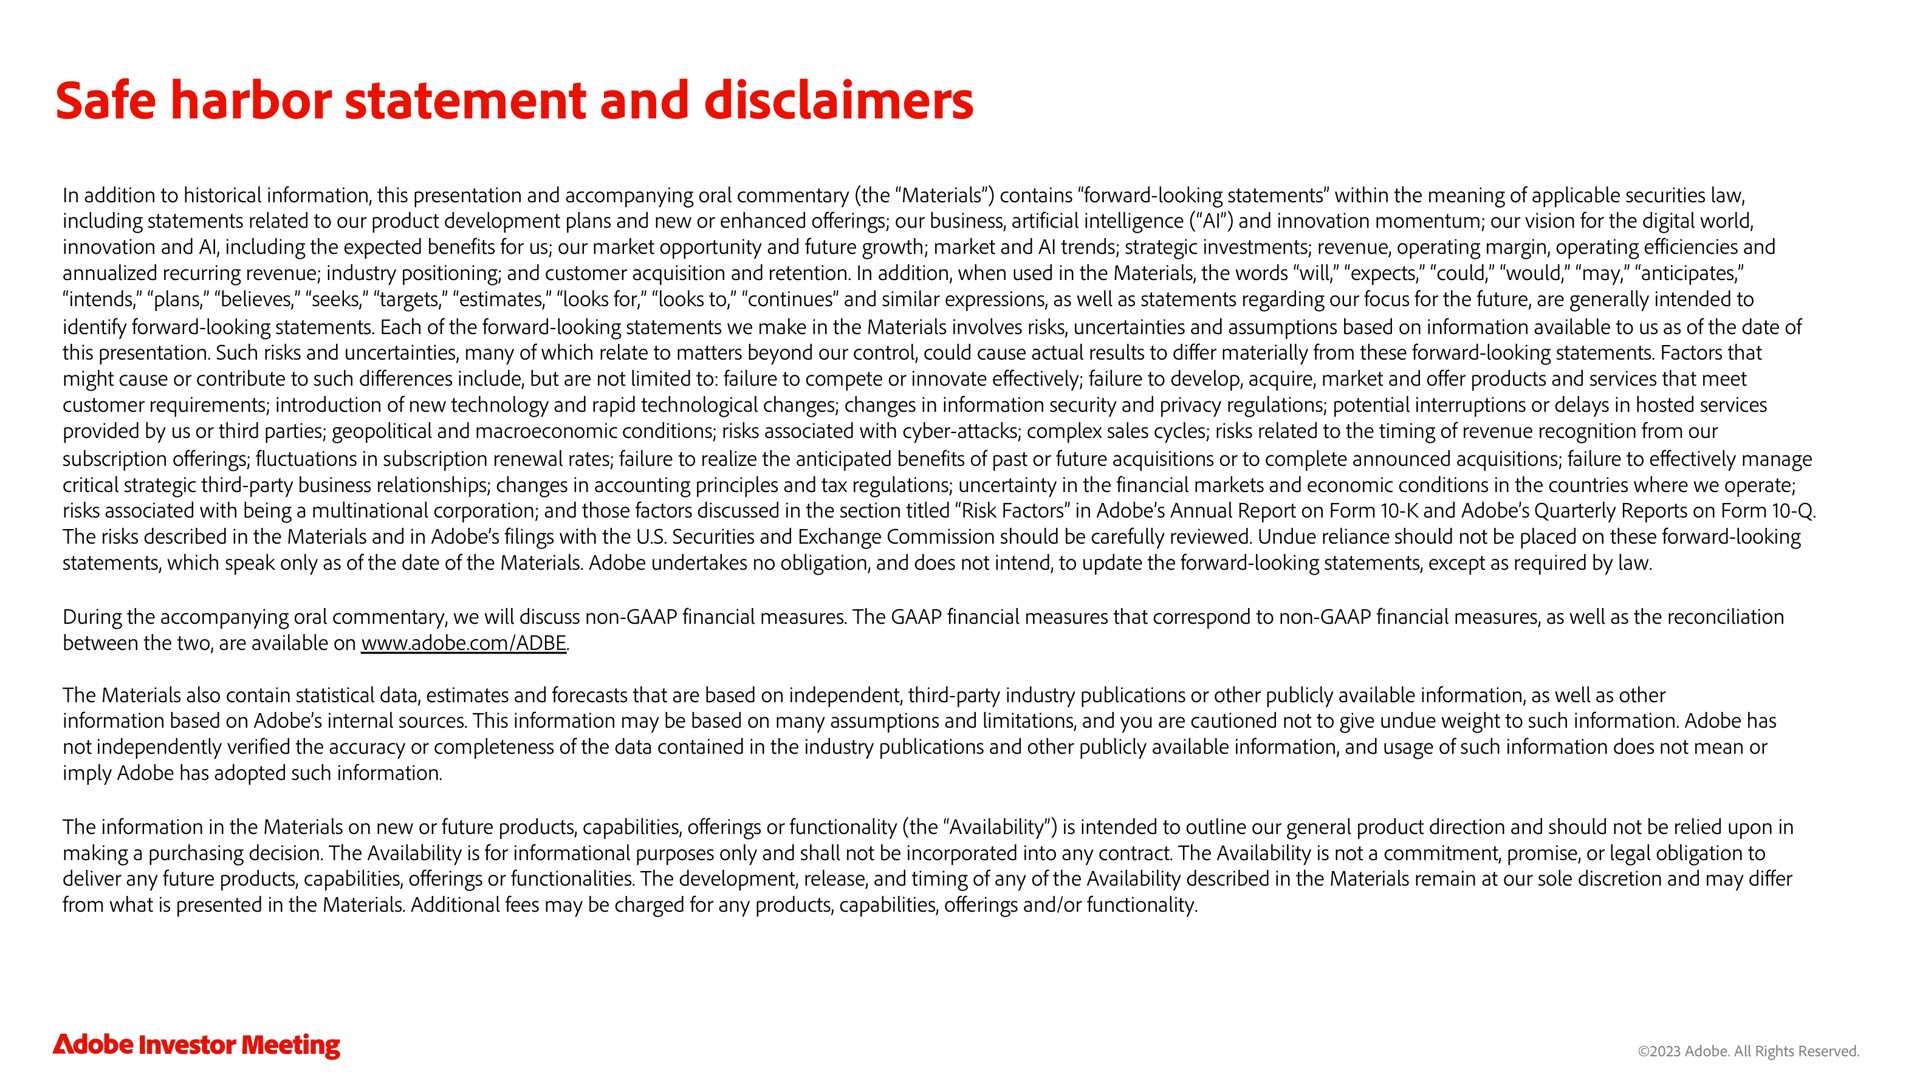 safe harbor statement and disclaimers | Adobe